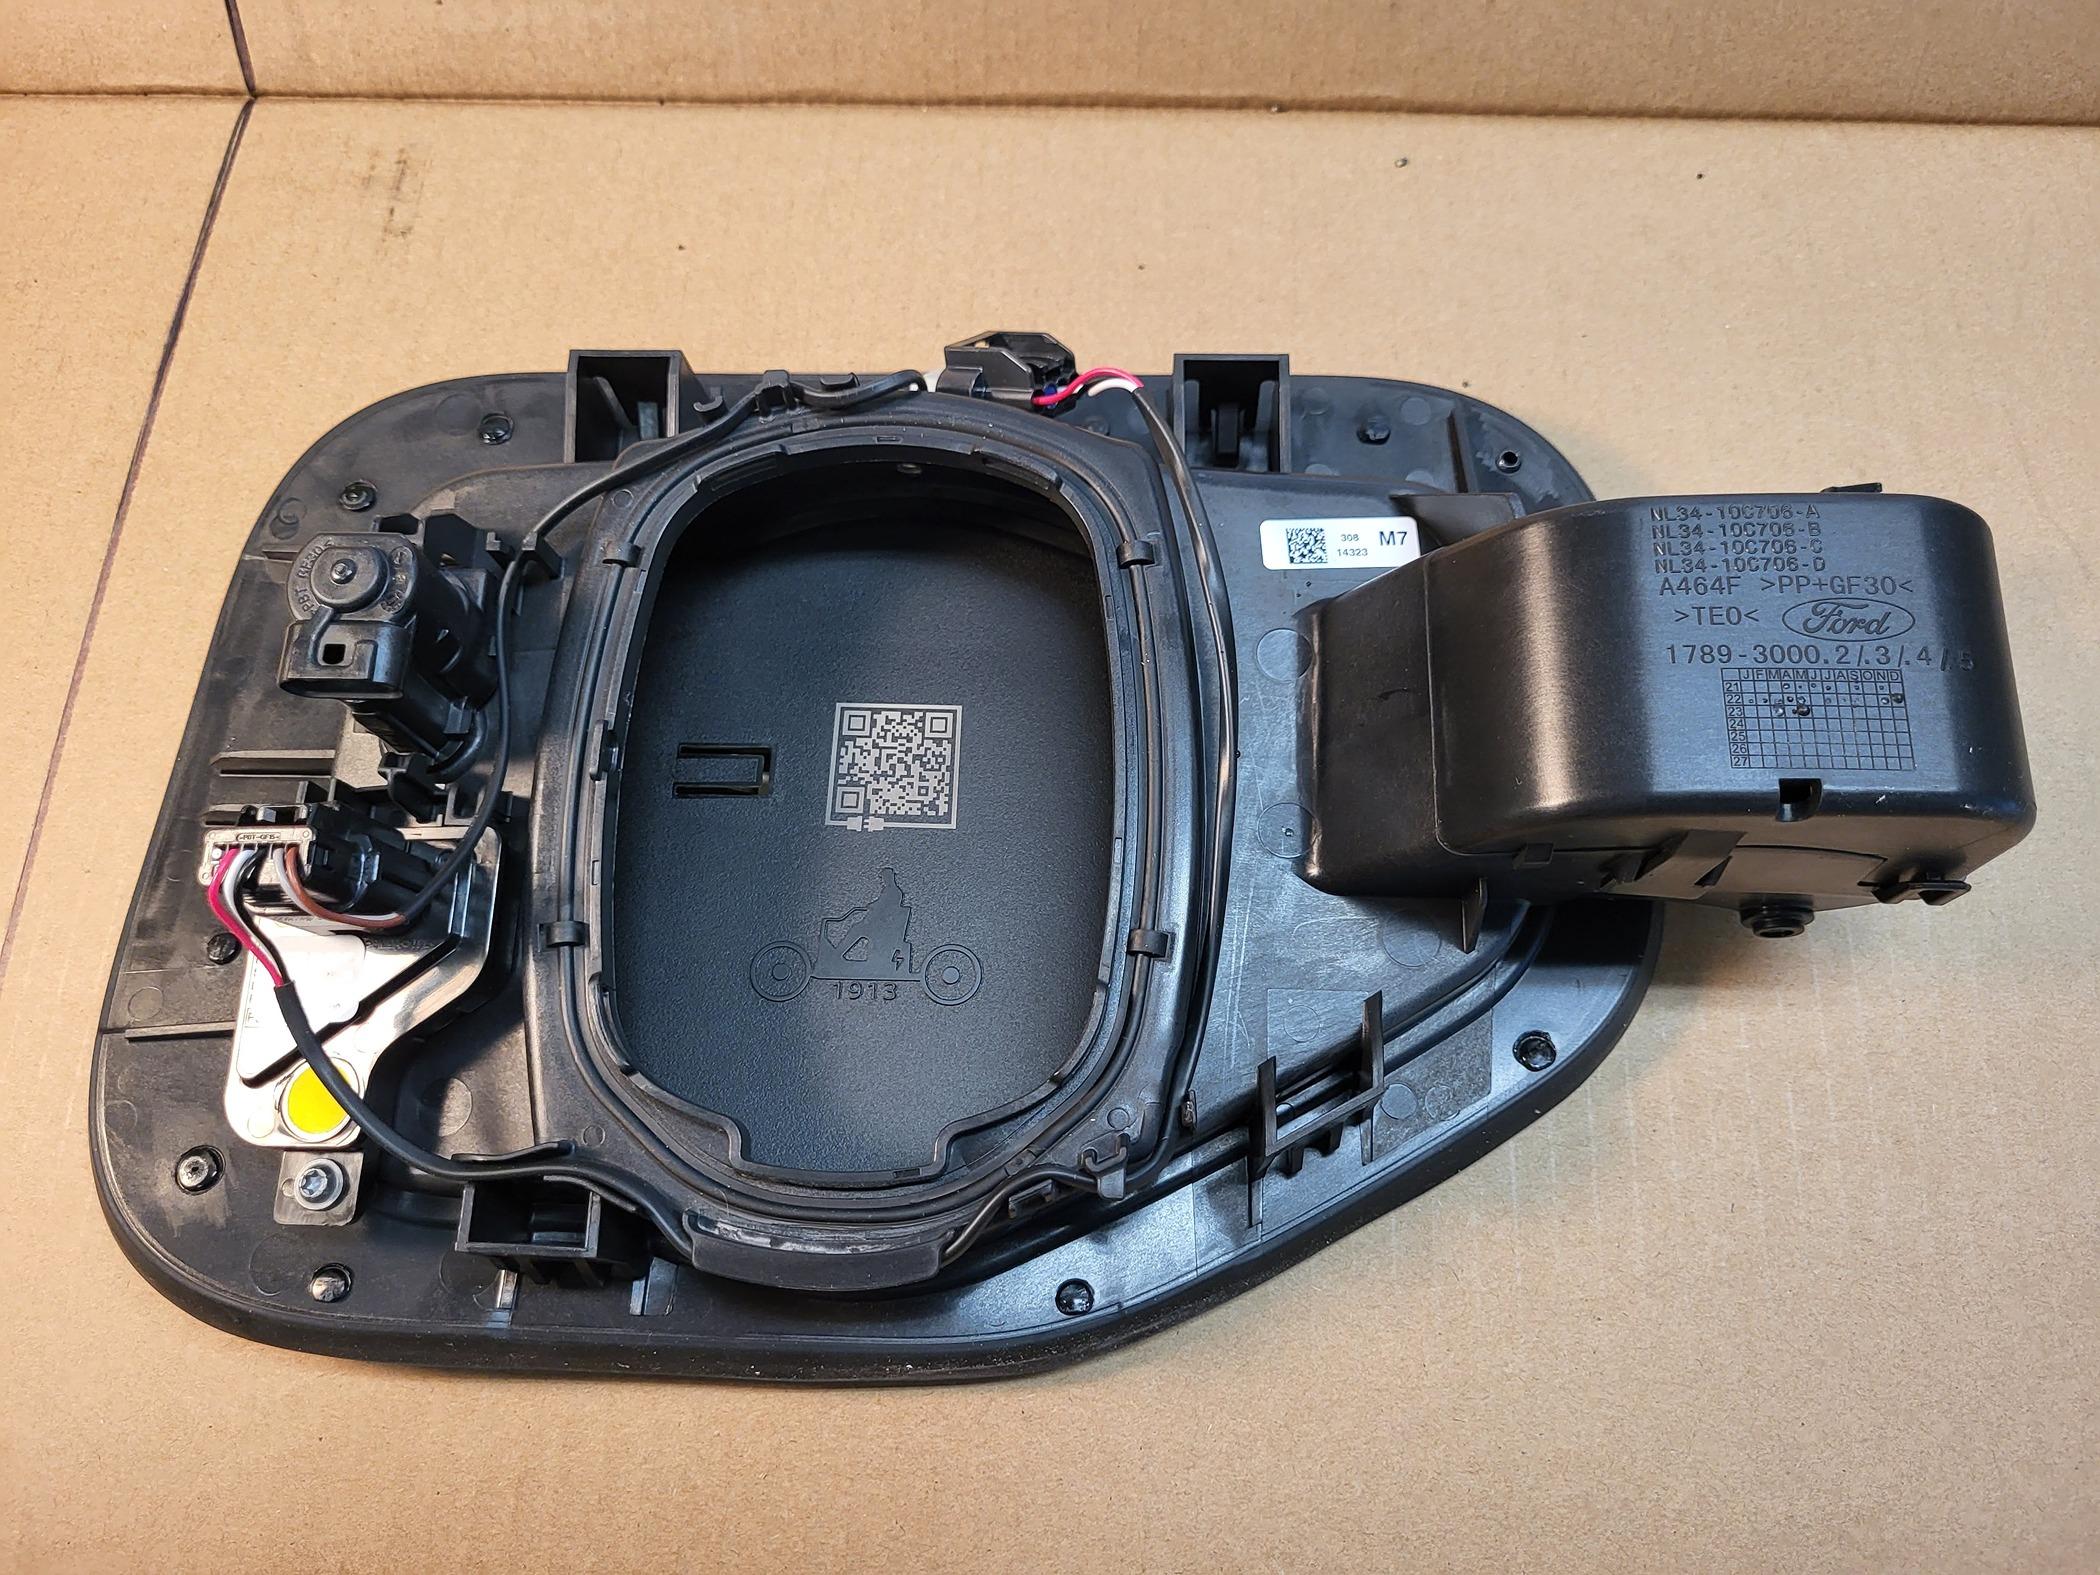 Ford F-150 Lightning Charge port door for sale without cover plate $125 20240327_101818